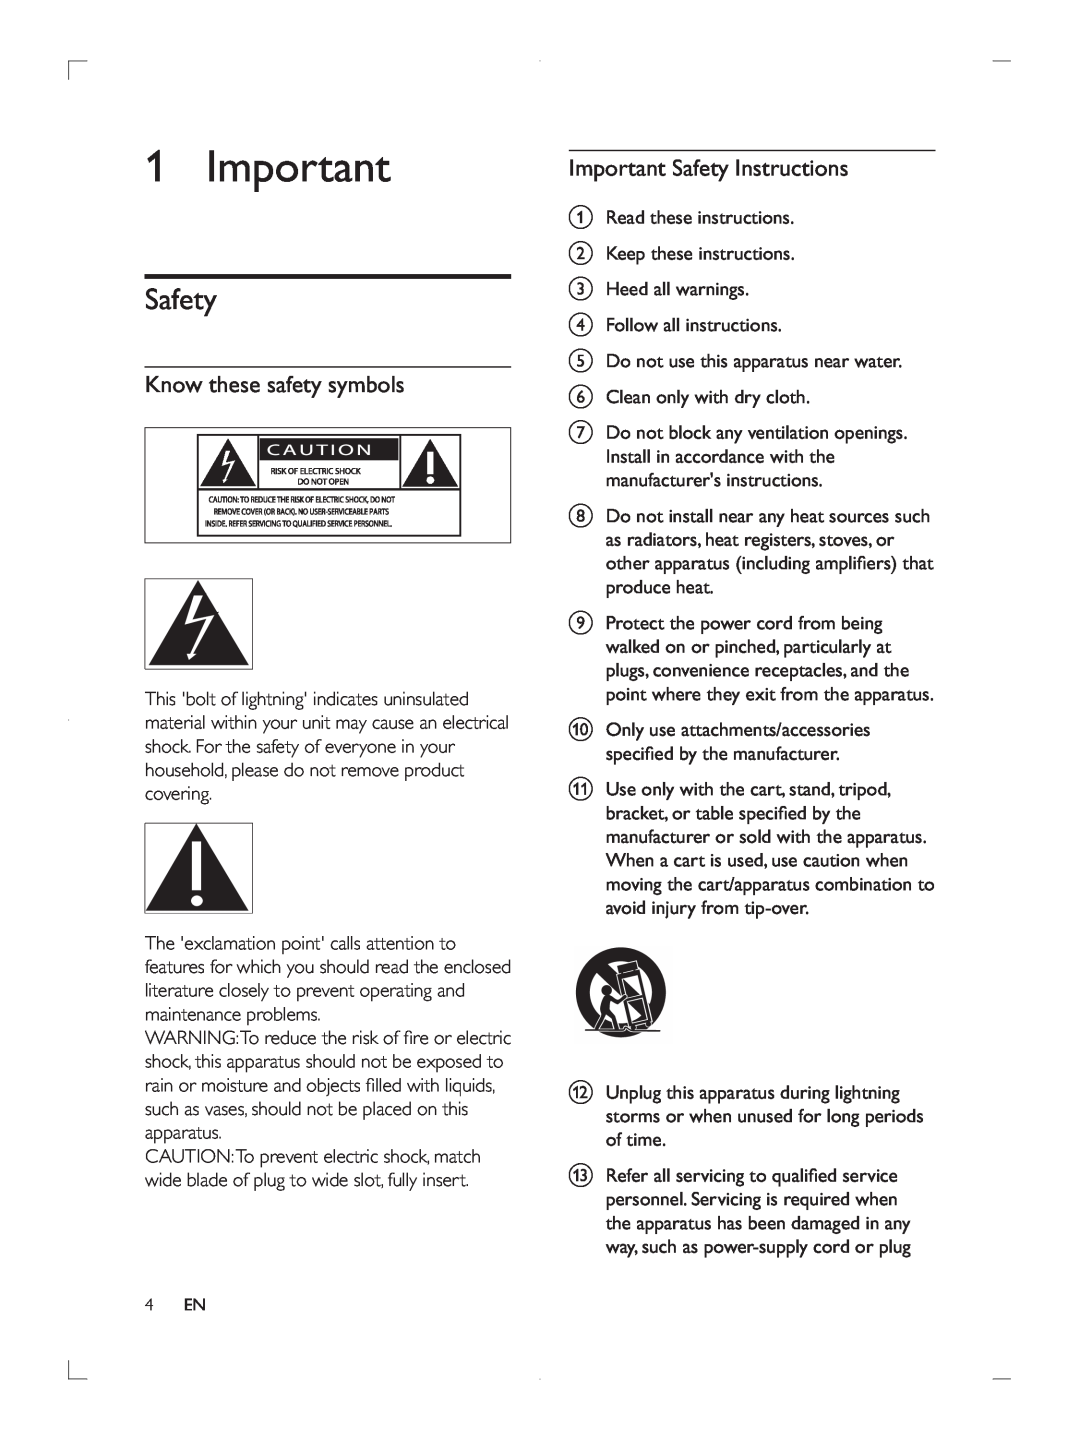 Philips FWP3200D user manual Know these safety symbols, Important Safety Instructions 